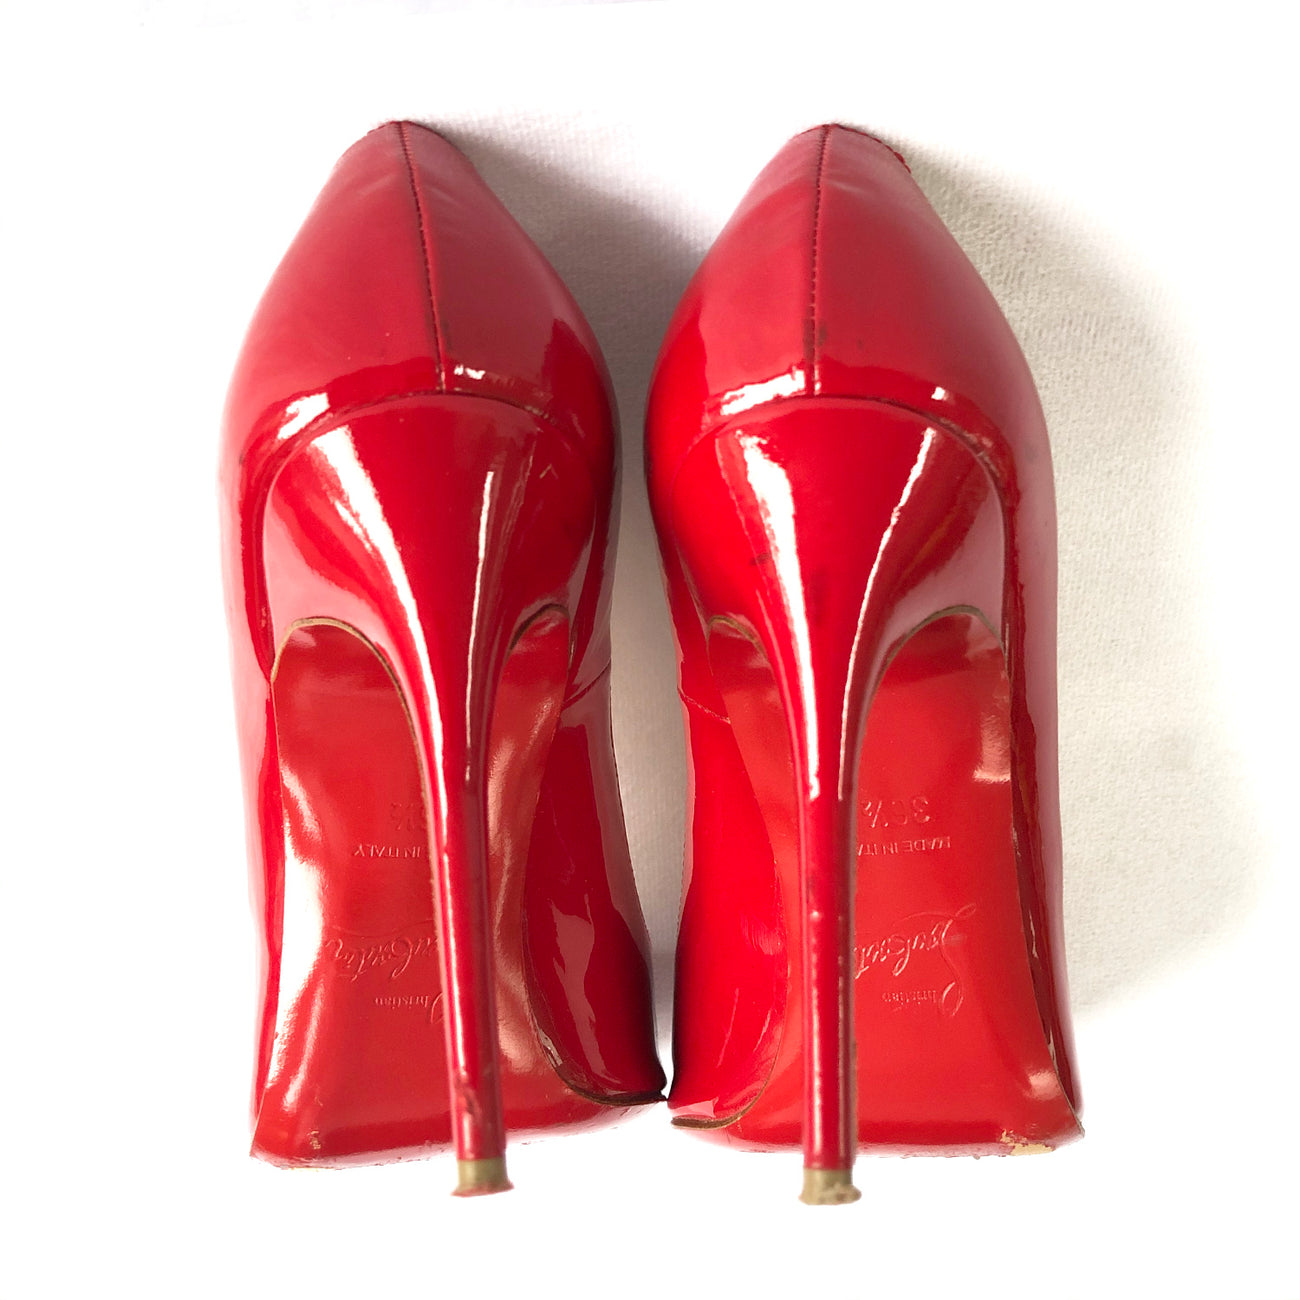 Christian Louboutin Red Patent Leather Flo Peep Toe Pumps Size 38